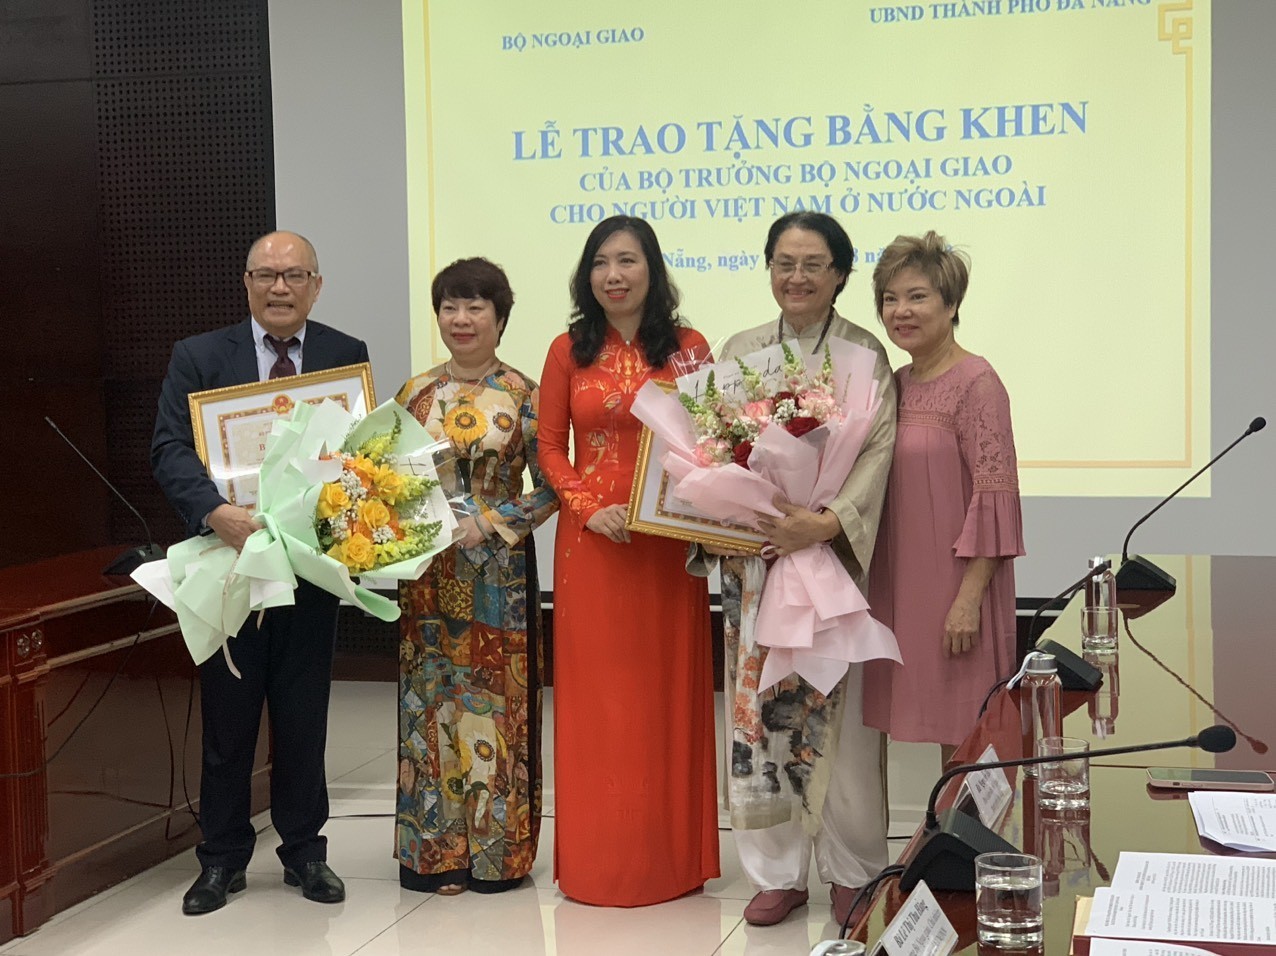 Two OVs Awarding Certificates of Merit for Contributions to Da Nang